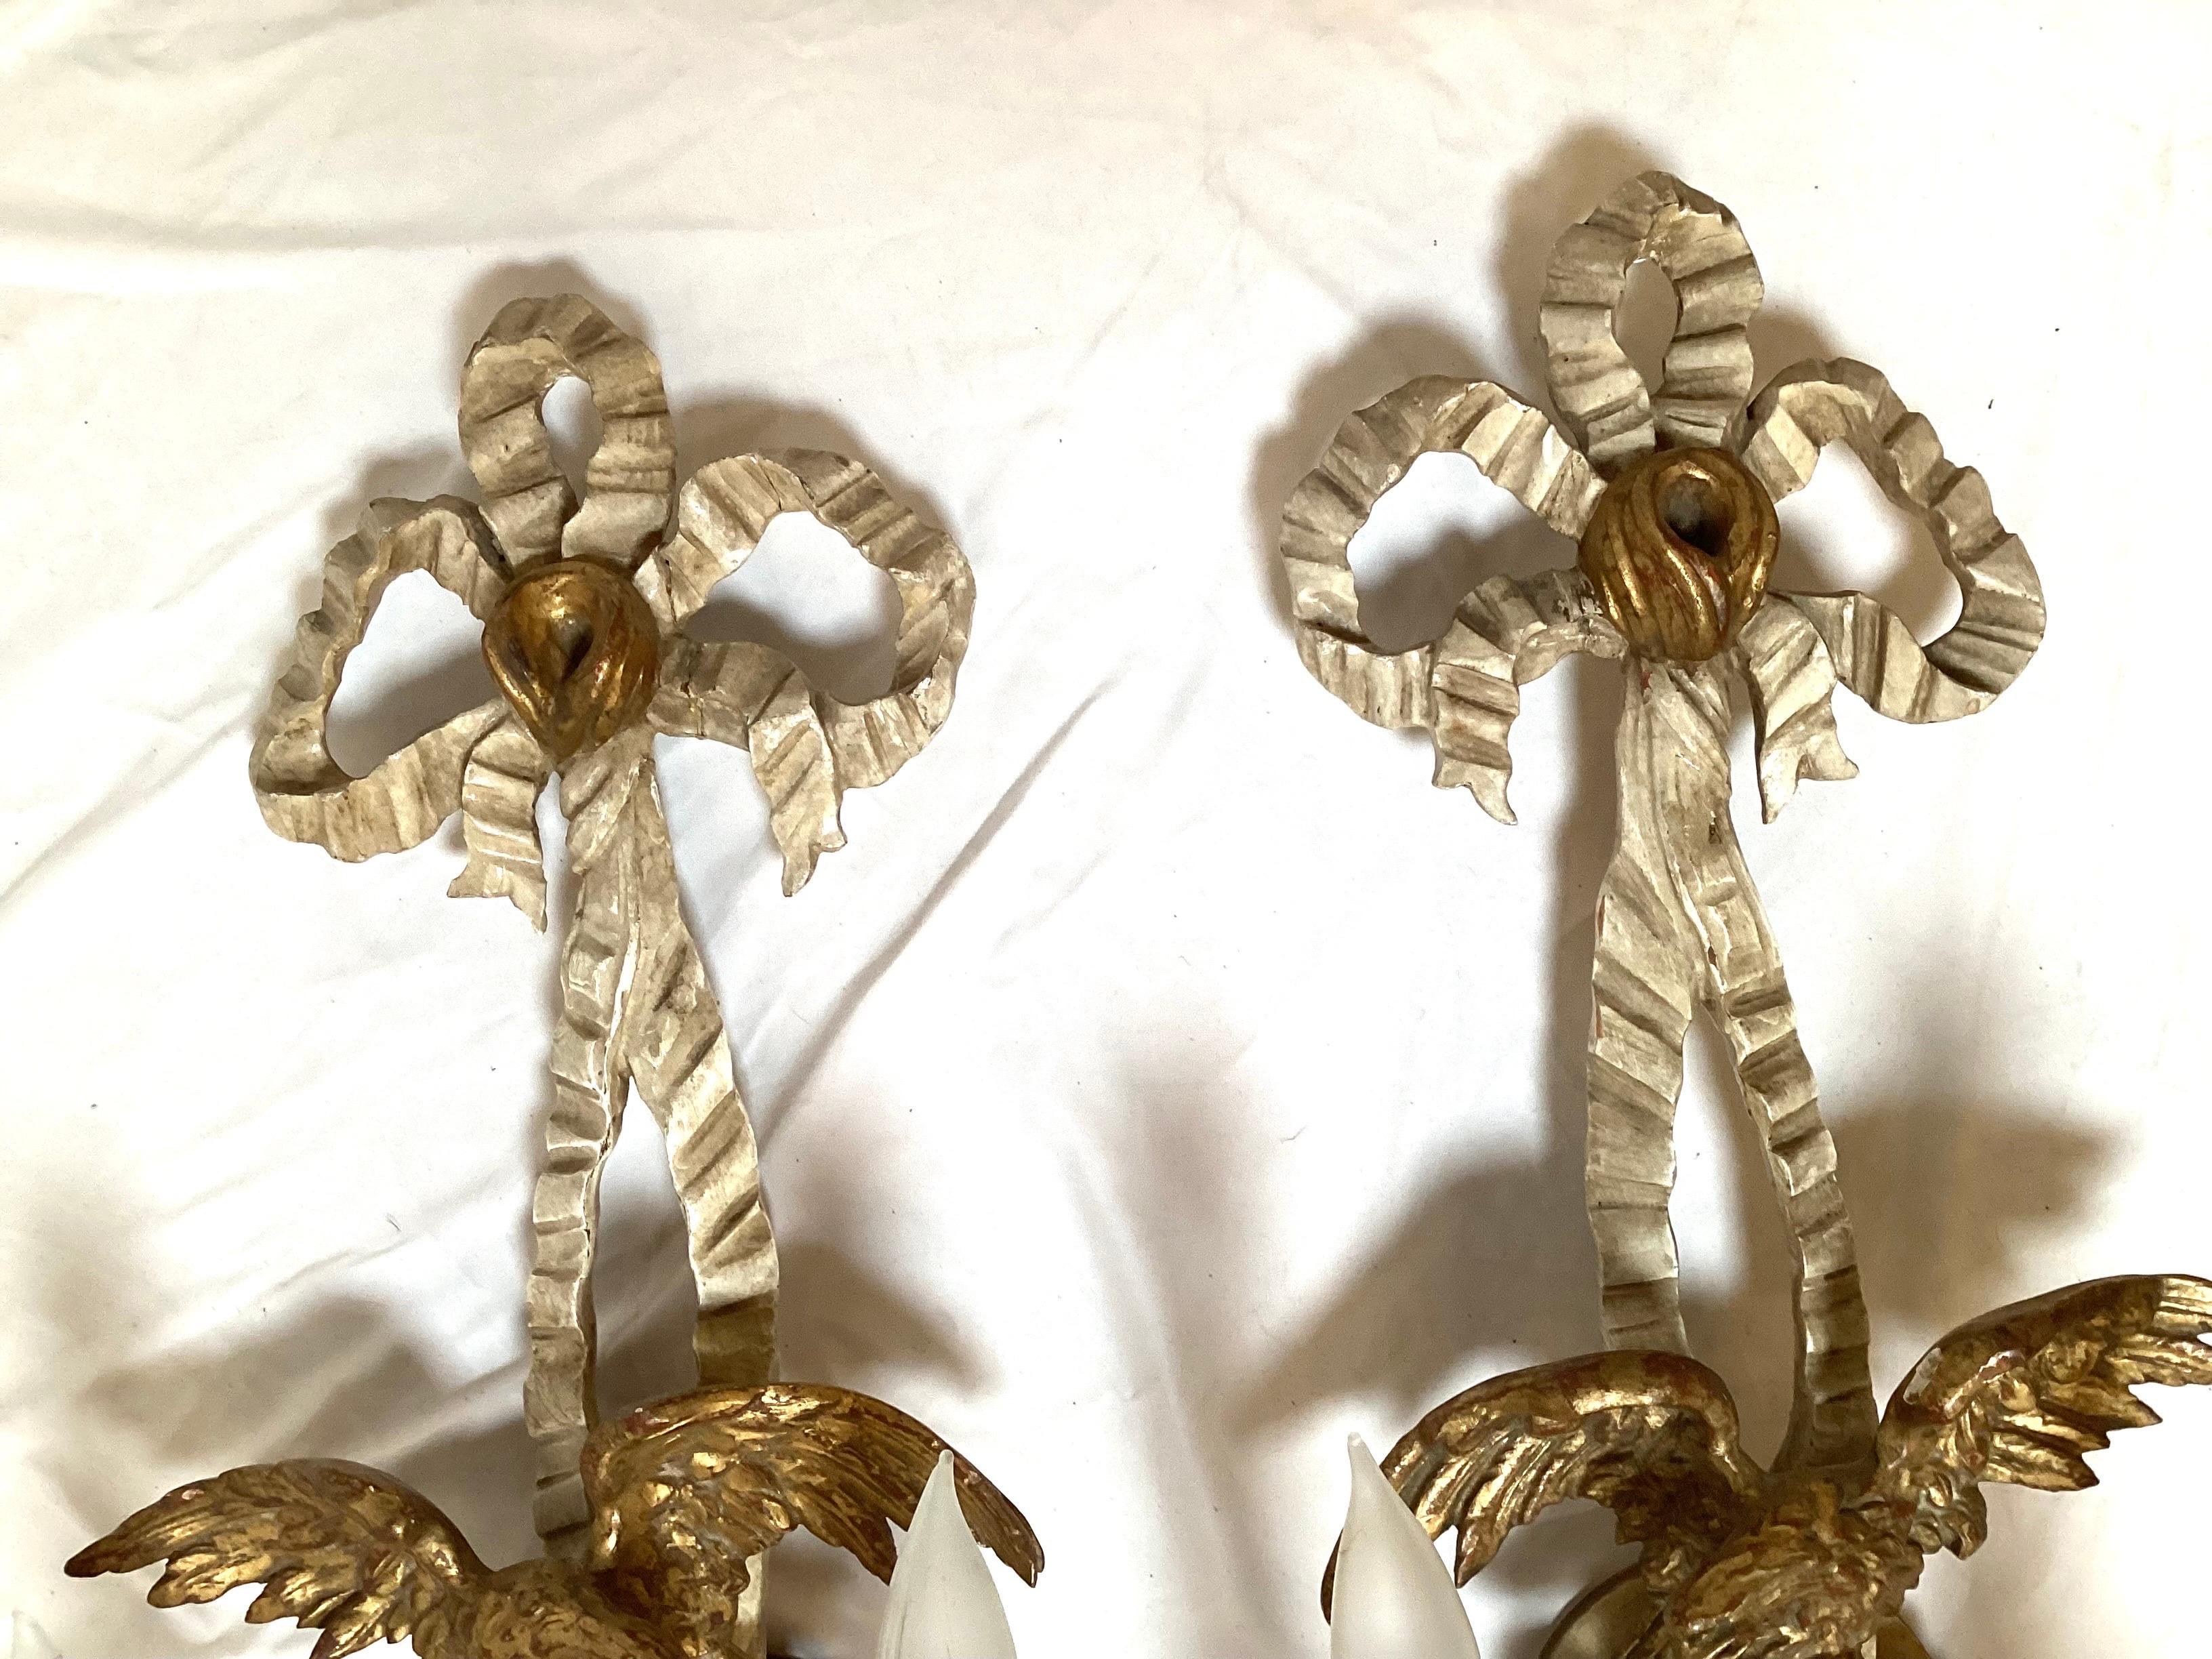 Pair of early 20th century hand carved eagle motif gilt wood wall sconces.
Nicely carved and made, will fit in with any traditional American decor.